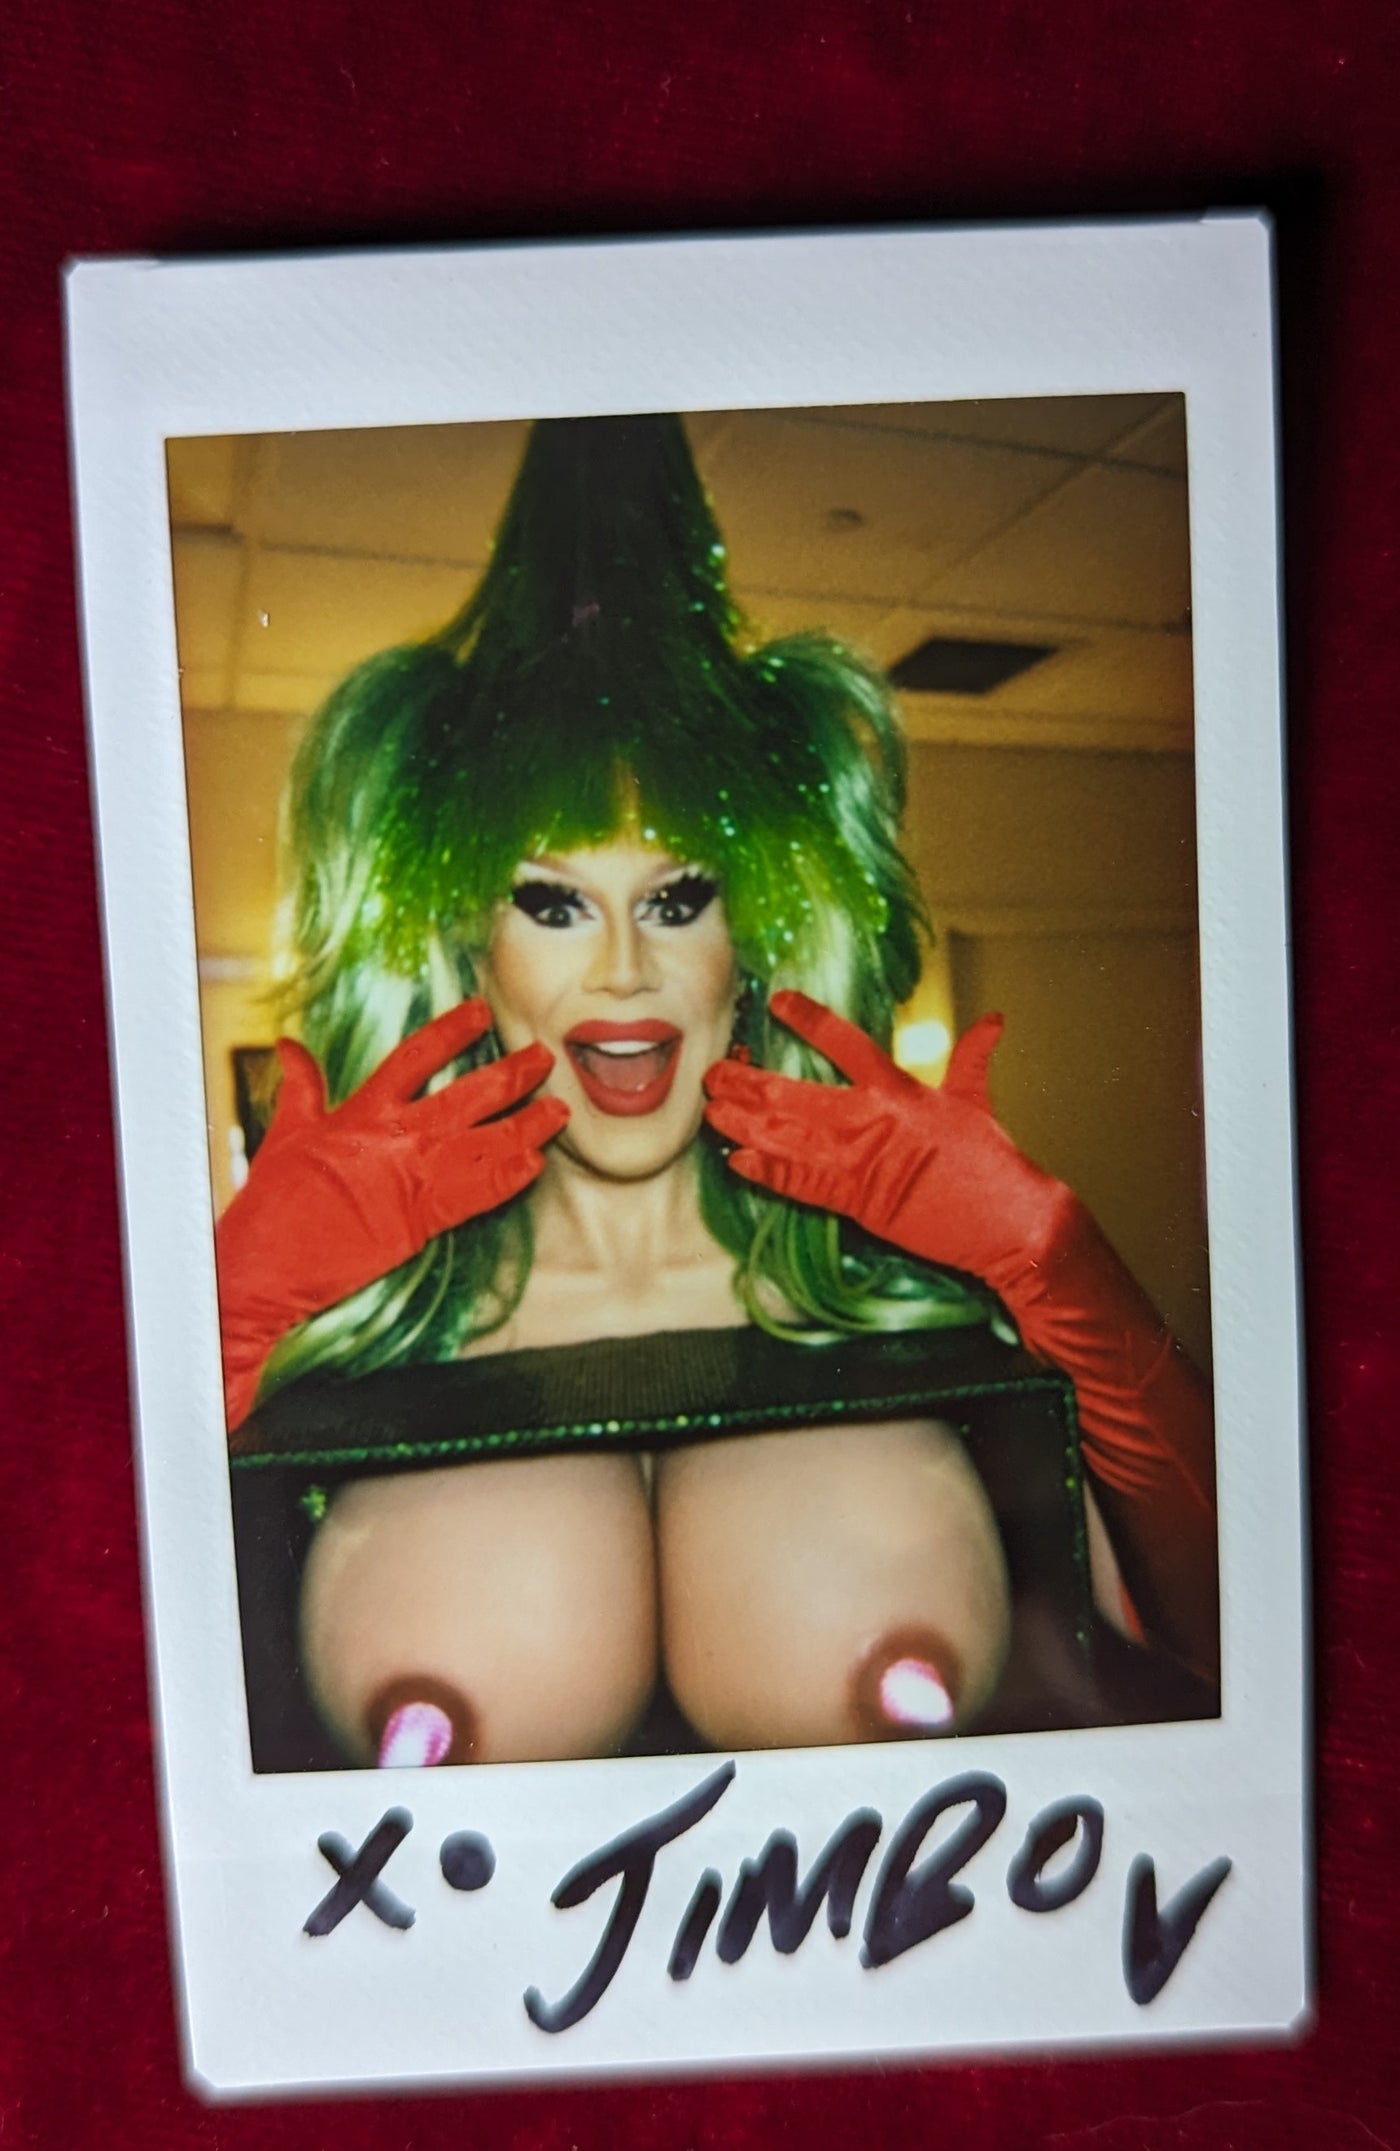 XMAS TOUR POLAROIDS - It's a picture of my tits in a box!